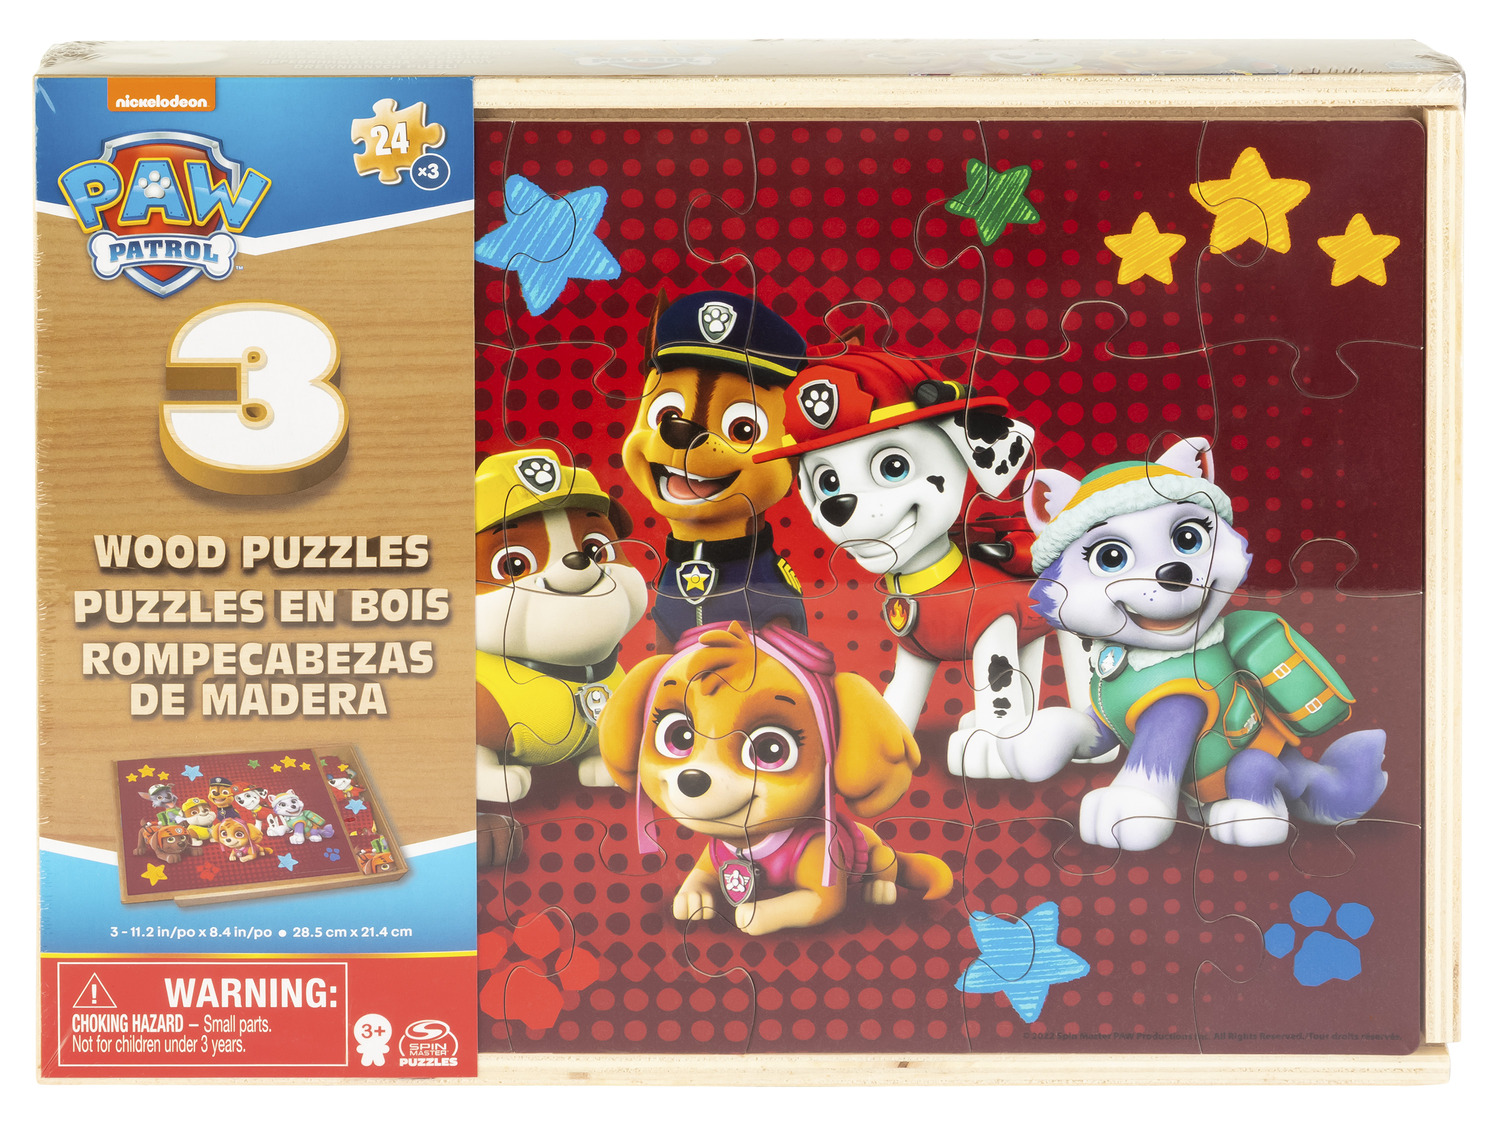 Spinmaster Paw Patrol Holz Puzzle, 72 Teile | LIDL